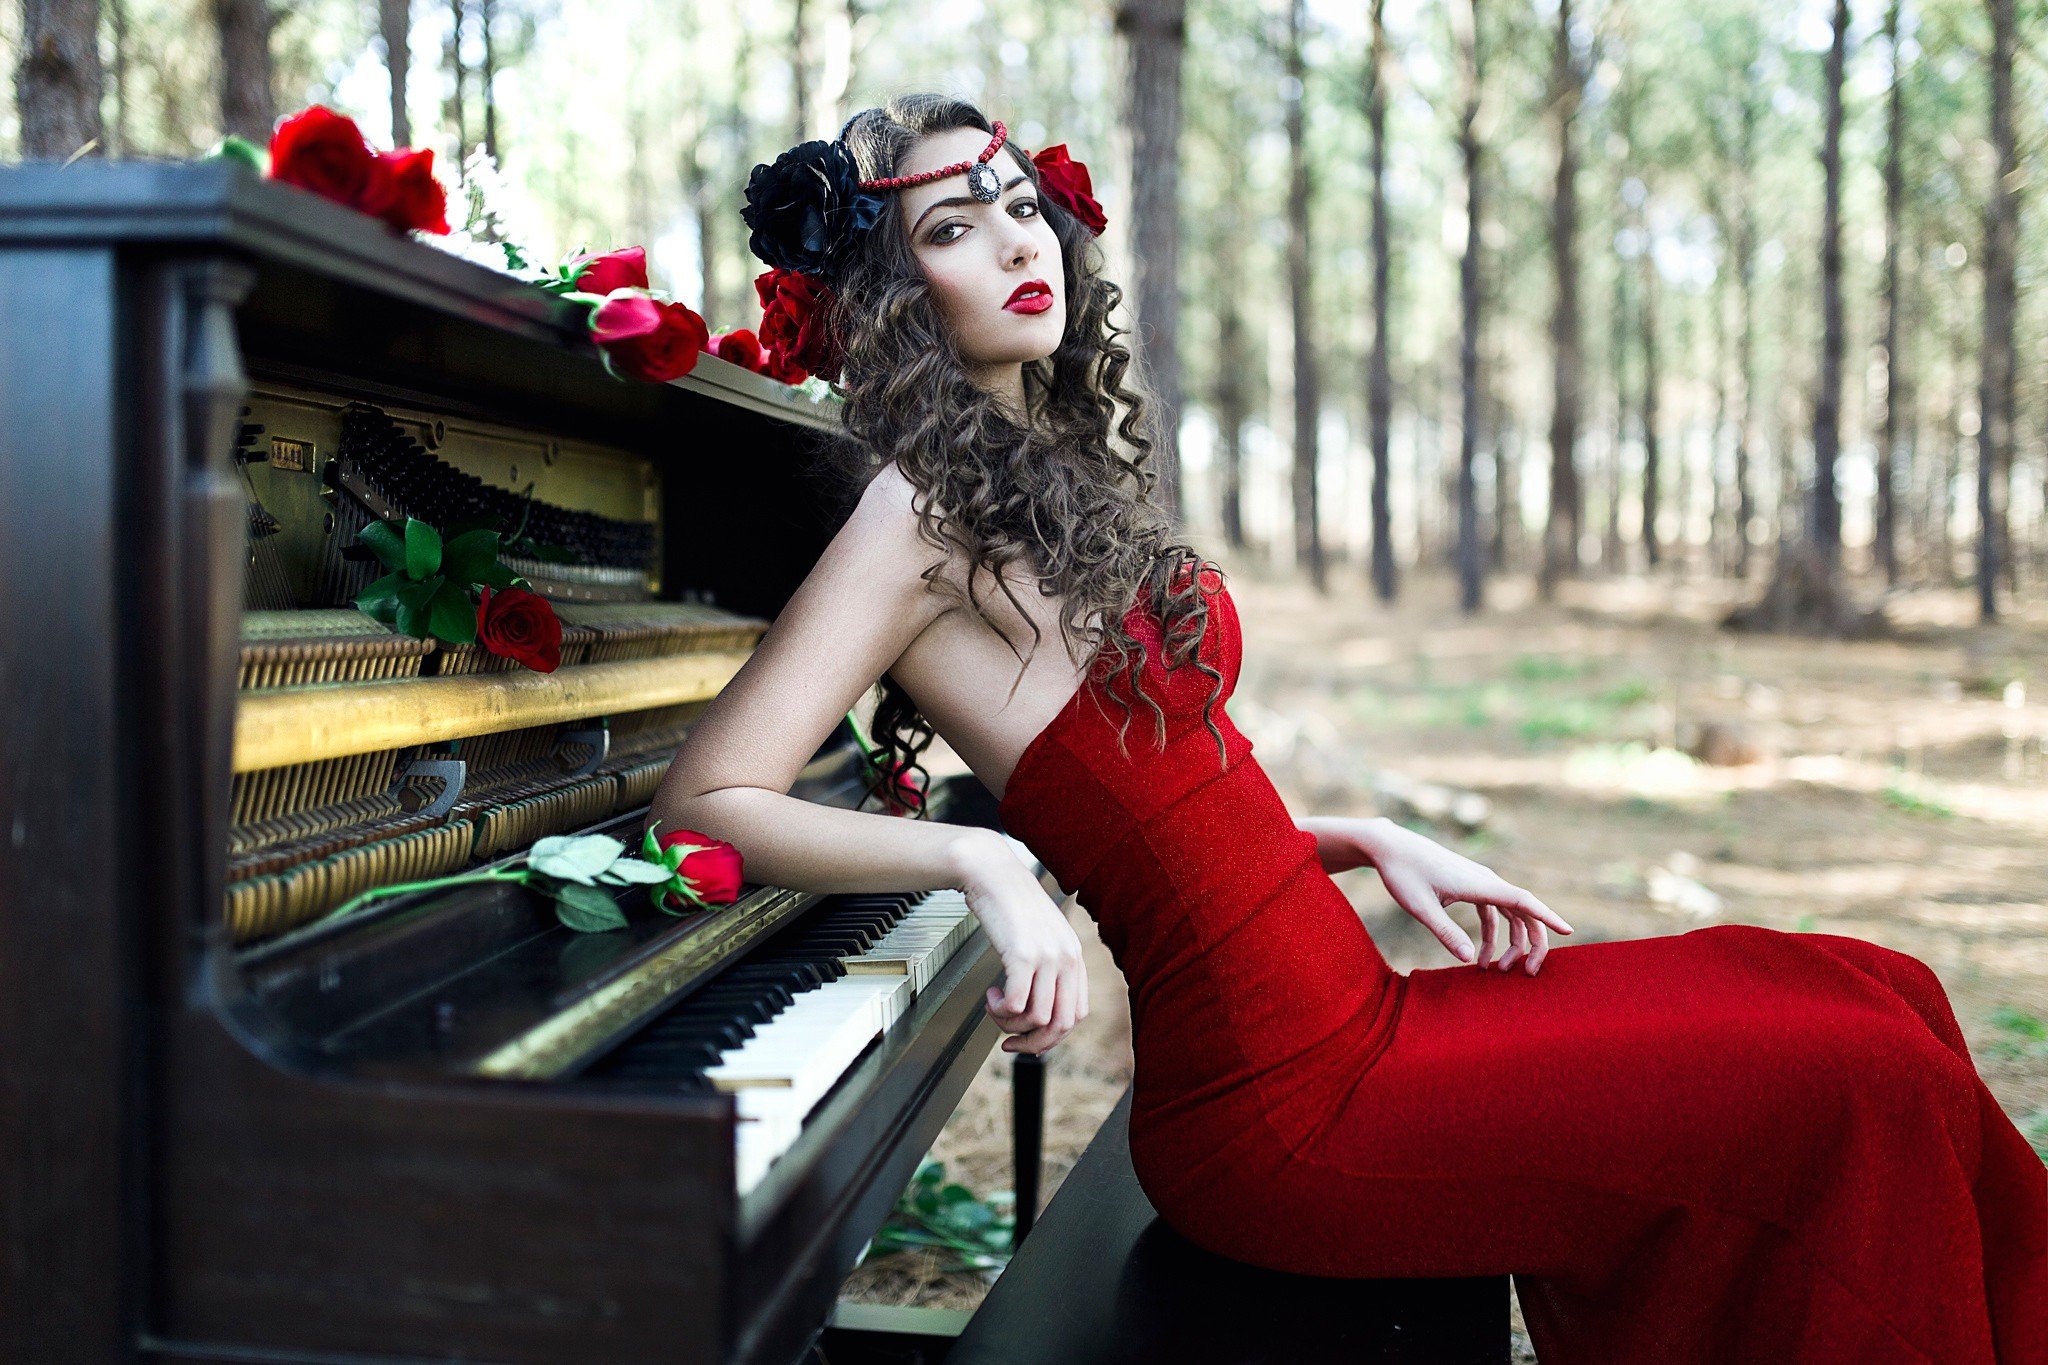 women, Model, Brunette, Long hair, Women outdoors, Trees, Red lipstick, Red dress, Piano, Open mouth, Rose, Sitting, Headband, Curly hair, Red flowers Wallpaper